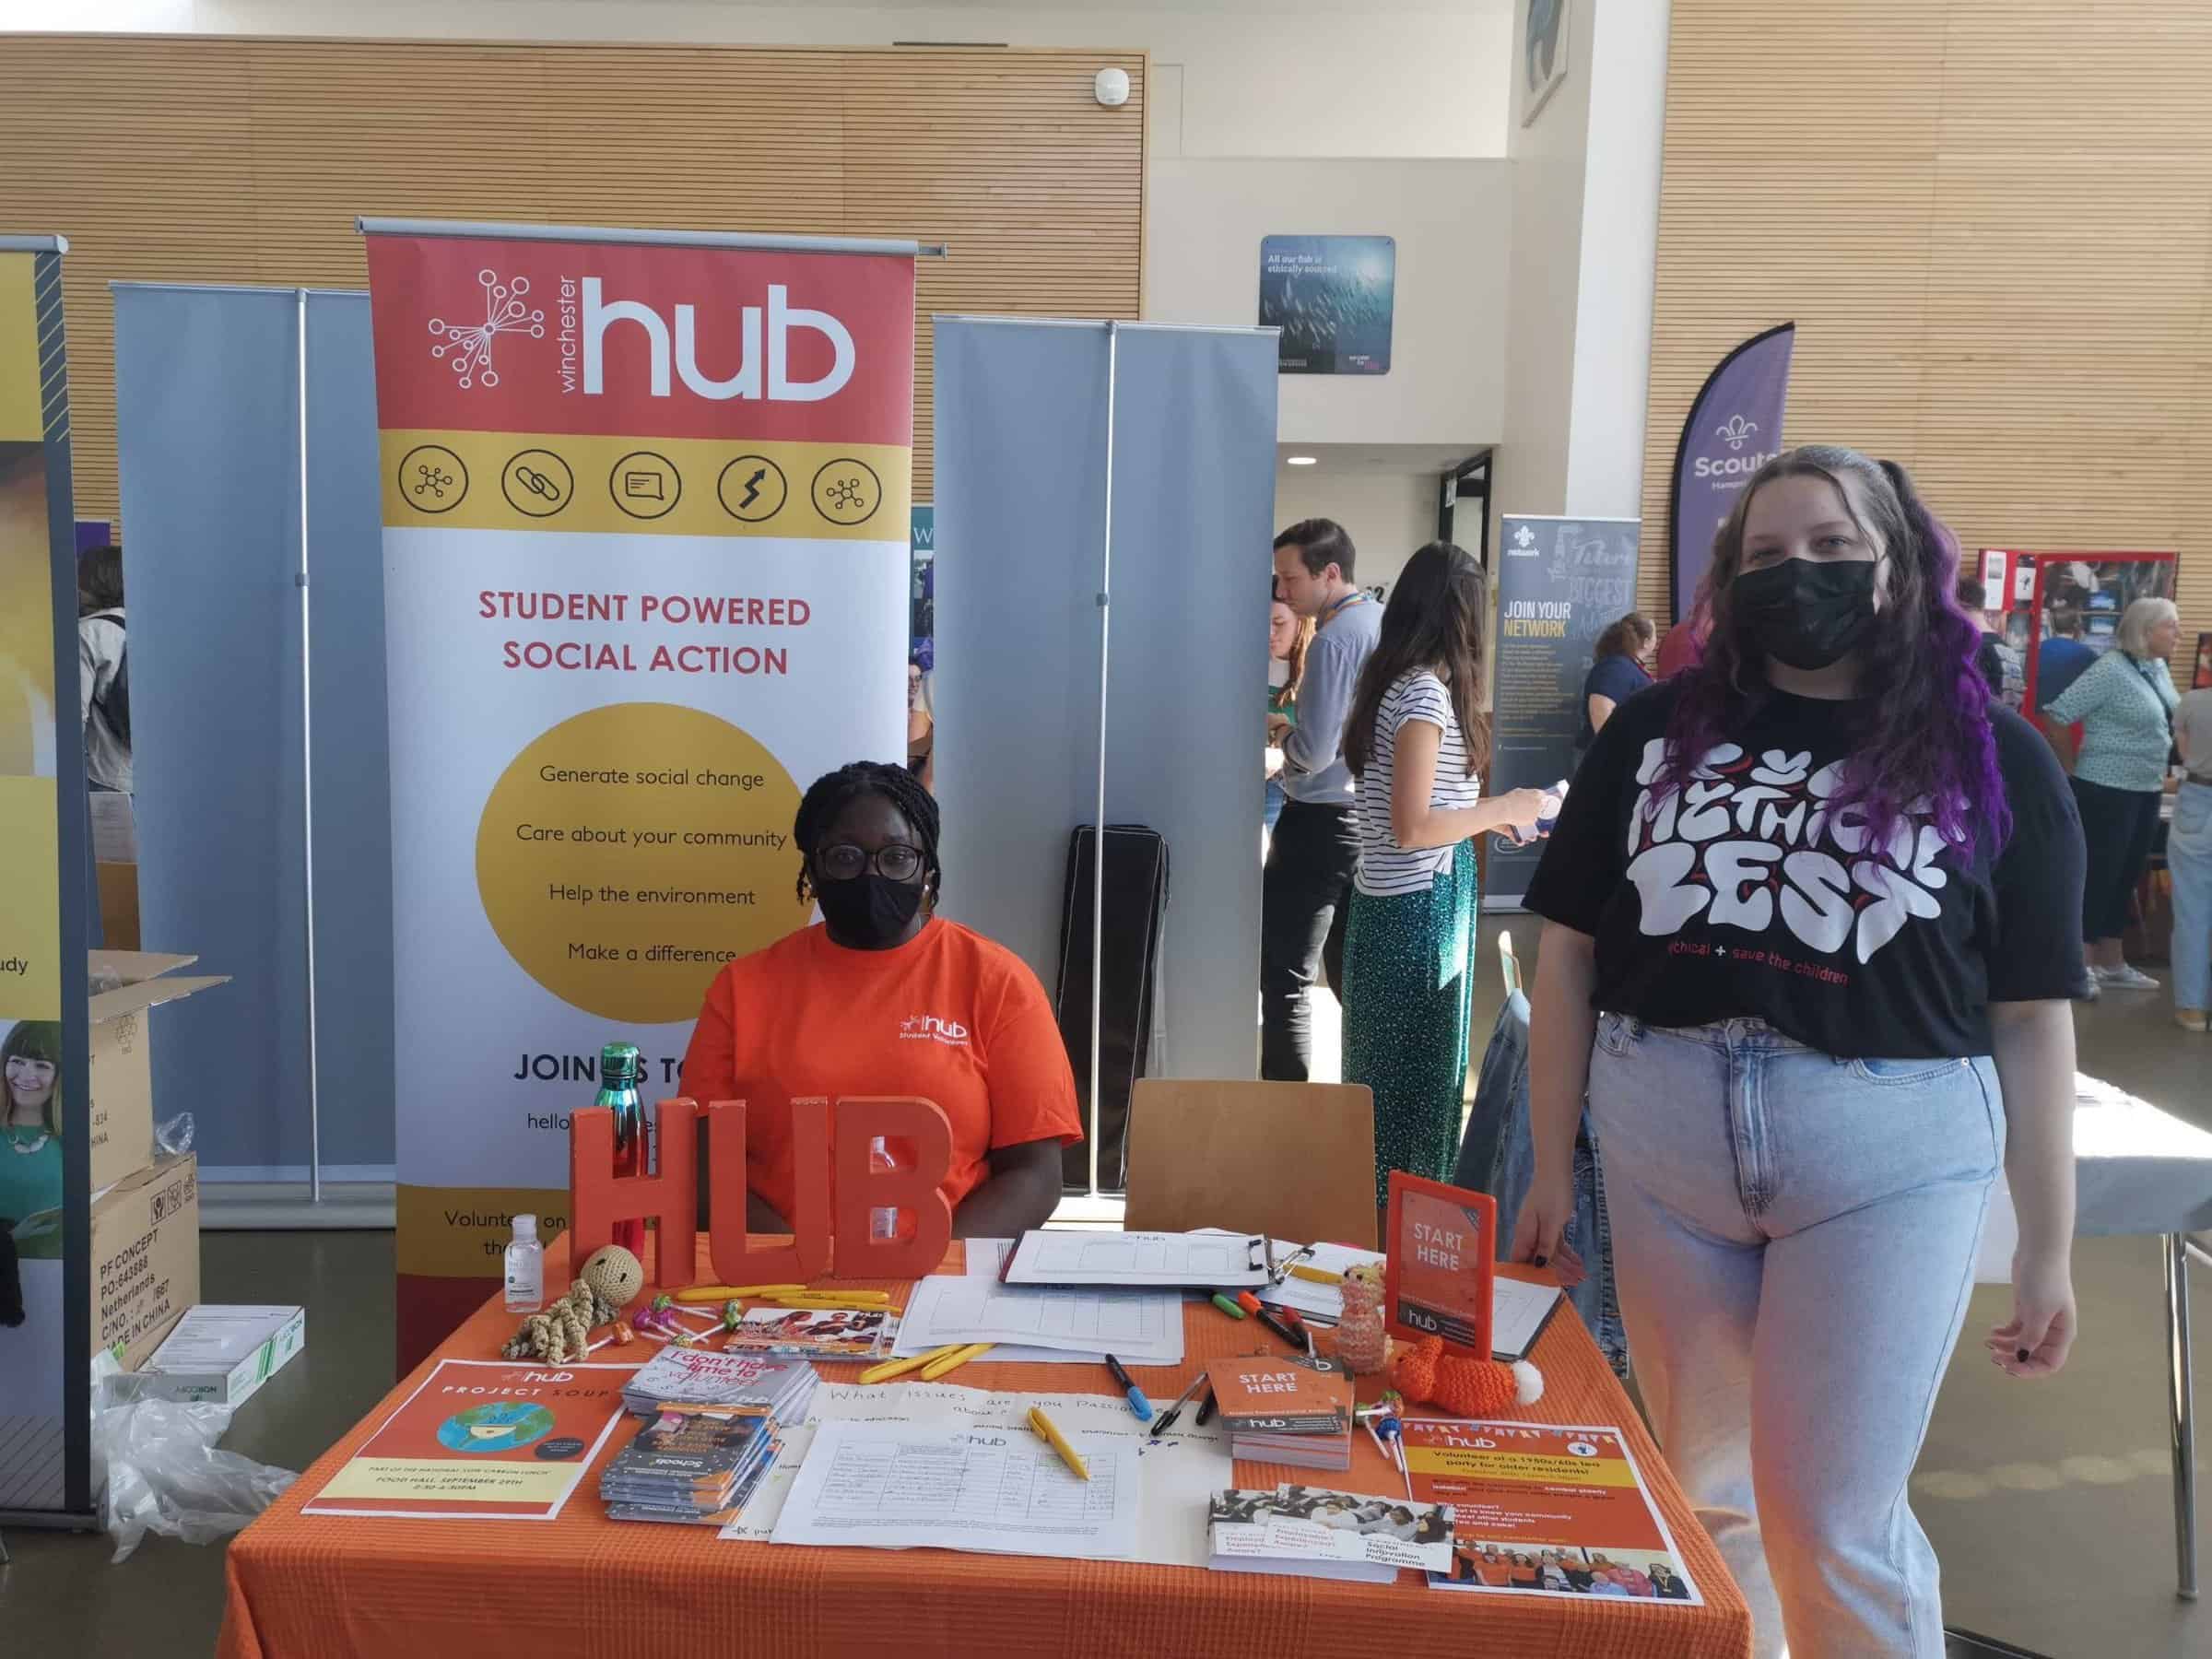 Two volunteers are at a table with an orange table cloth covered in leaflets. One is sat behind the table wearing an orange t shirt, the other is stood to the right of the table wearing a black t-shirt. Behind the table is a banner reading "Winchester Hub". 